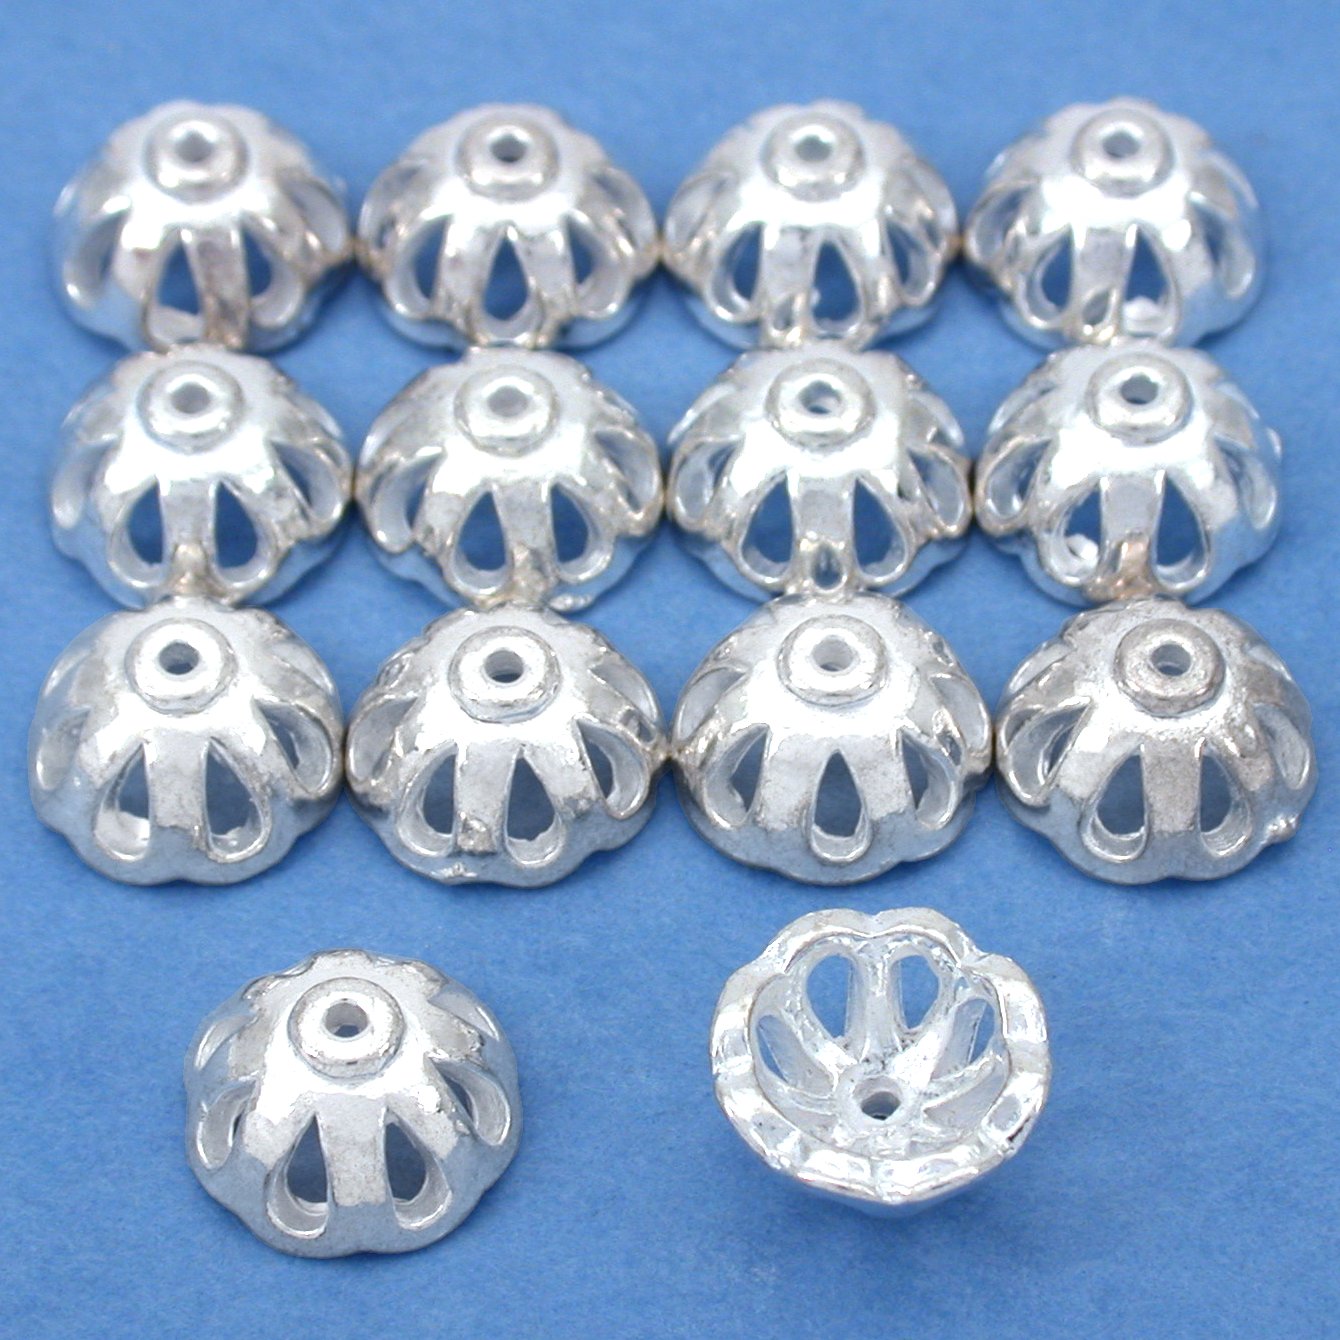 Filigree Bead Caps Silver Plated Beads 11mm 15 Grams 14Pcs Approx.